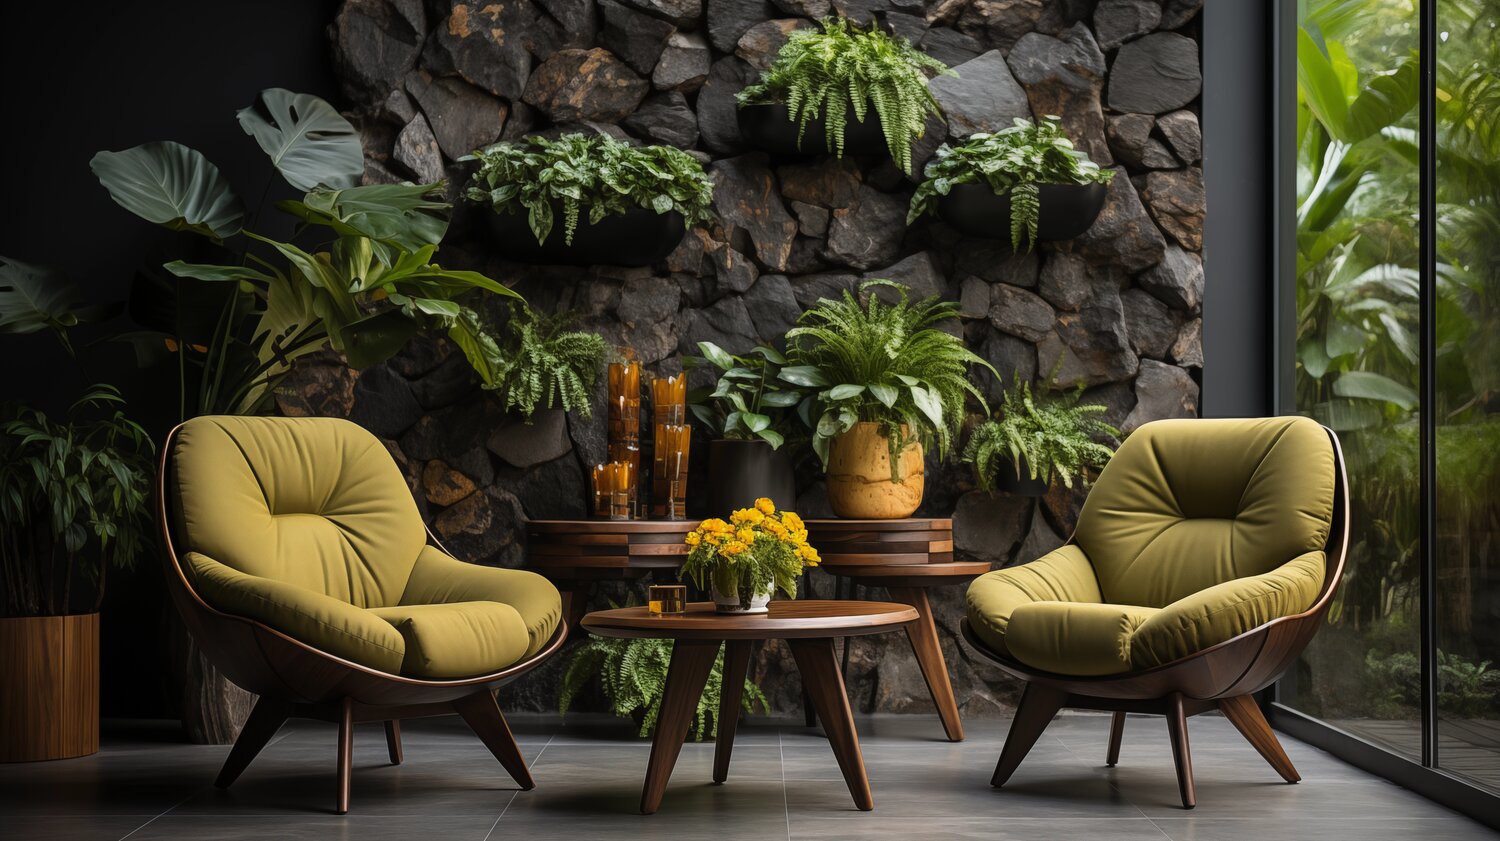 Explore the biophilic design trend by incorporating nature into your interior. Modern "art" chairs are also a new trend.